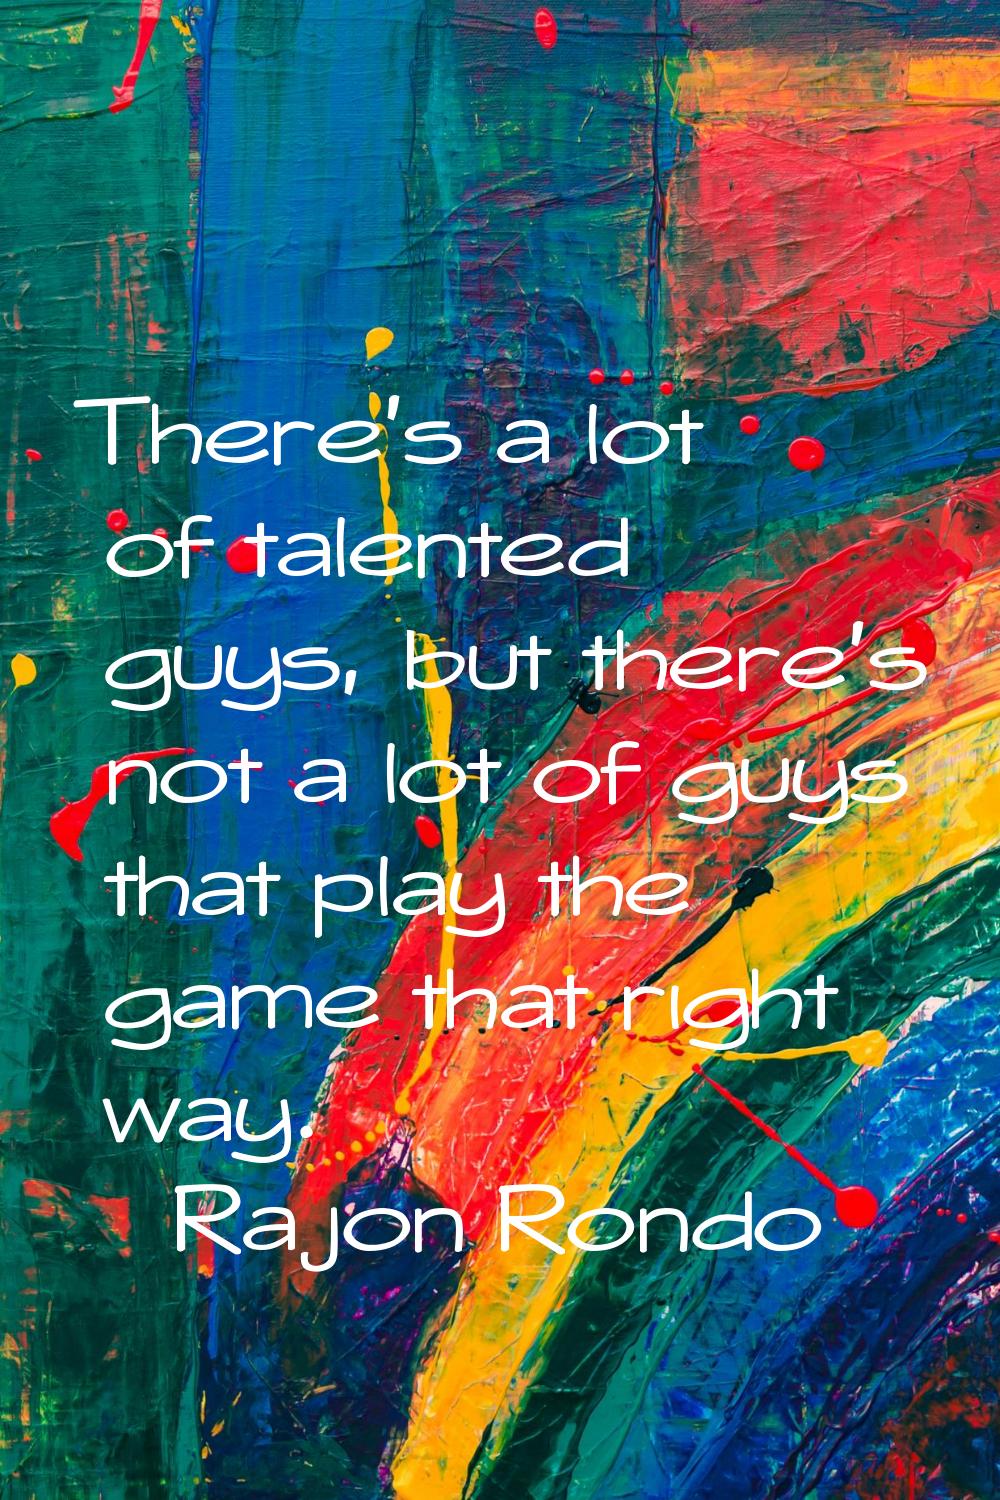 There's a lot of talented guys, but there's not a lot of guys that play the game that right way.